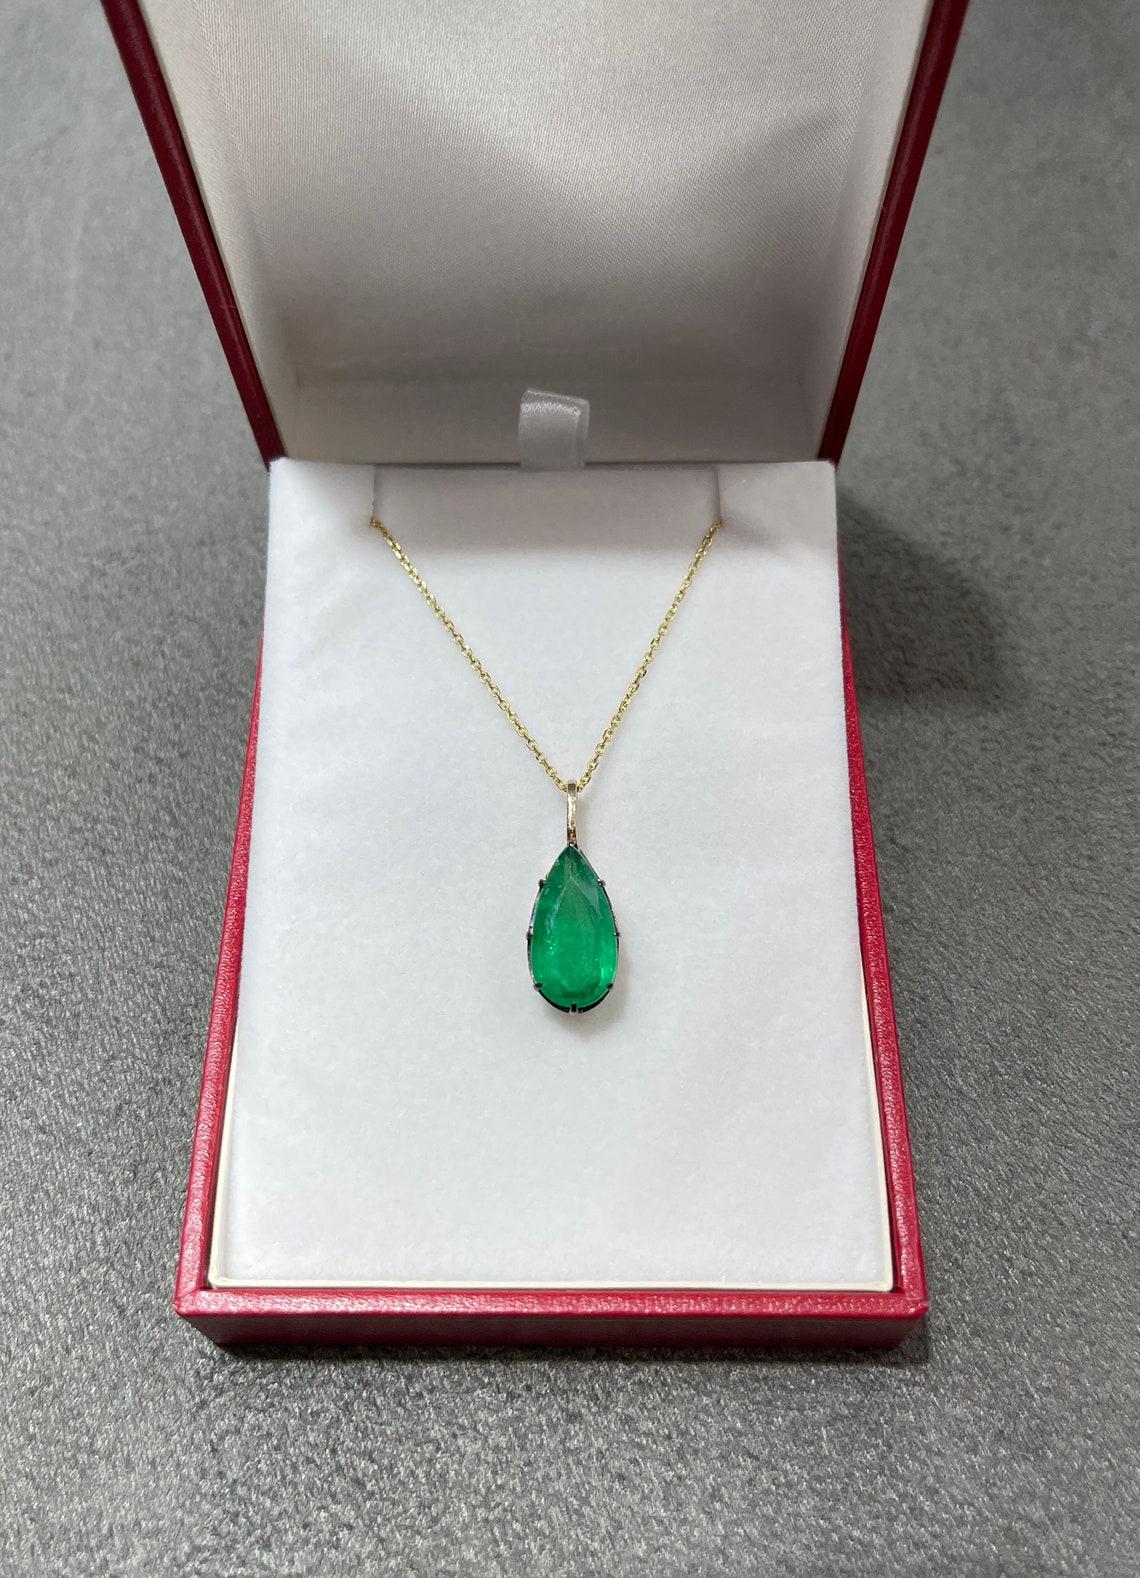 Displayed is a natural emerald Georgian styled solitaire pendant in 14K yellow gold. This gorgeous solitaire pendant carries a full 4.91-carat emerald in a prong setting. Black rhodium highlights the emeralds' bezel and prongs. Fully faceted, this